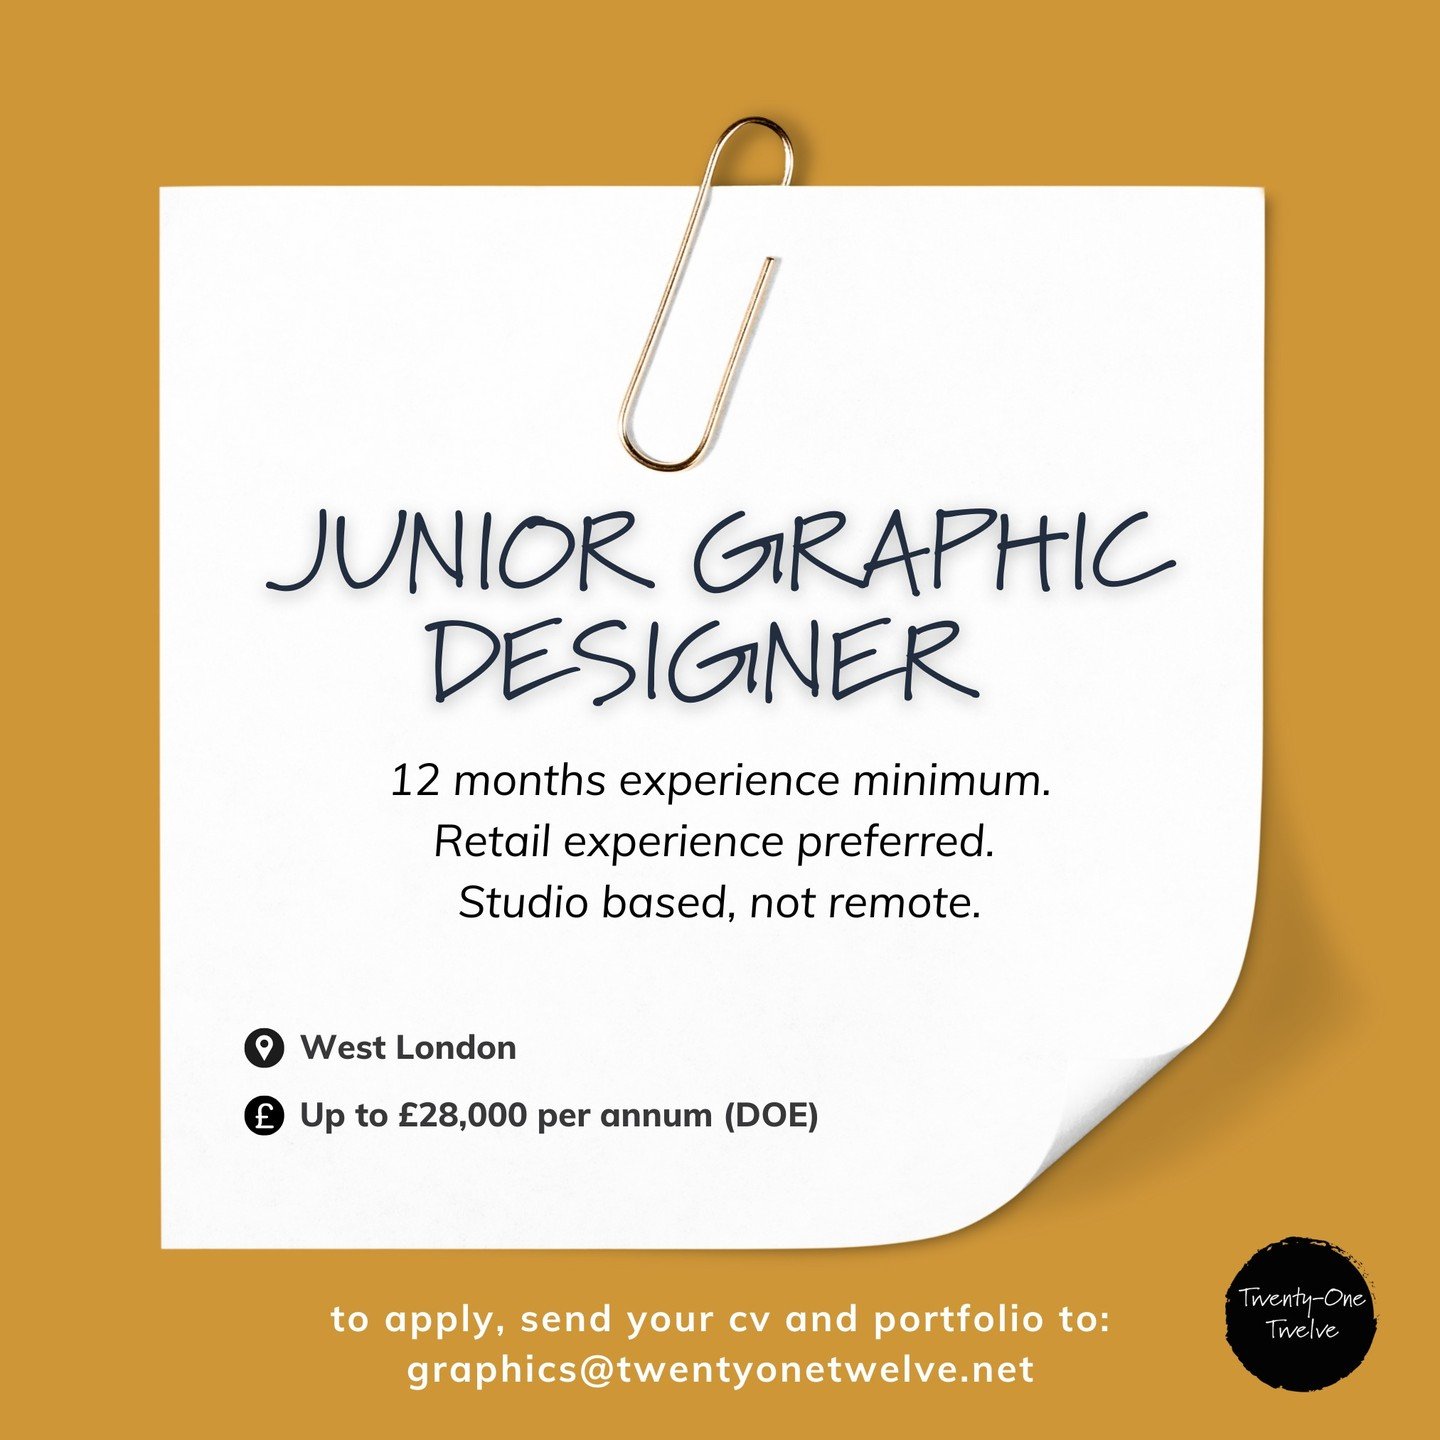 Great new opportunity for a Junior Graphic Designer with circa 12 months experience - ASAP start if possible! Even better if you have some experience working on retail environmental graphics, but not crucial. West London based studio. Please send me 